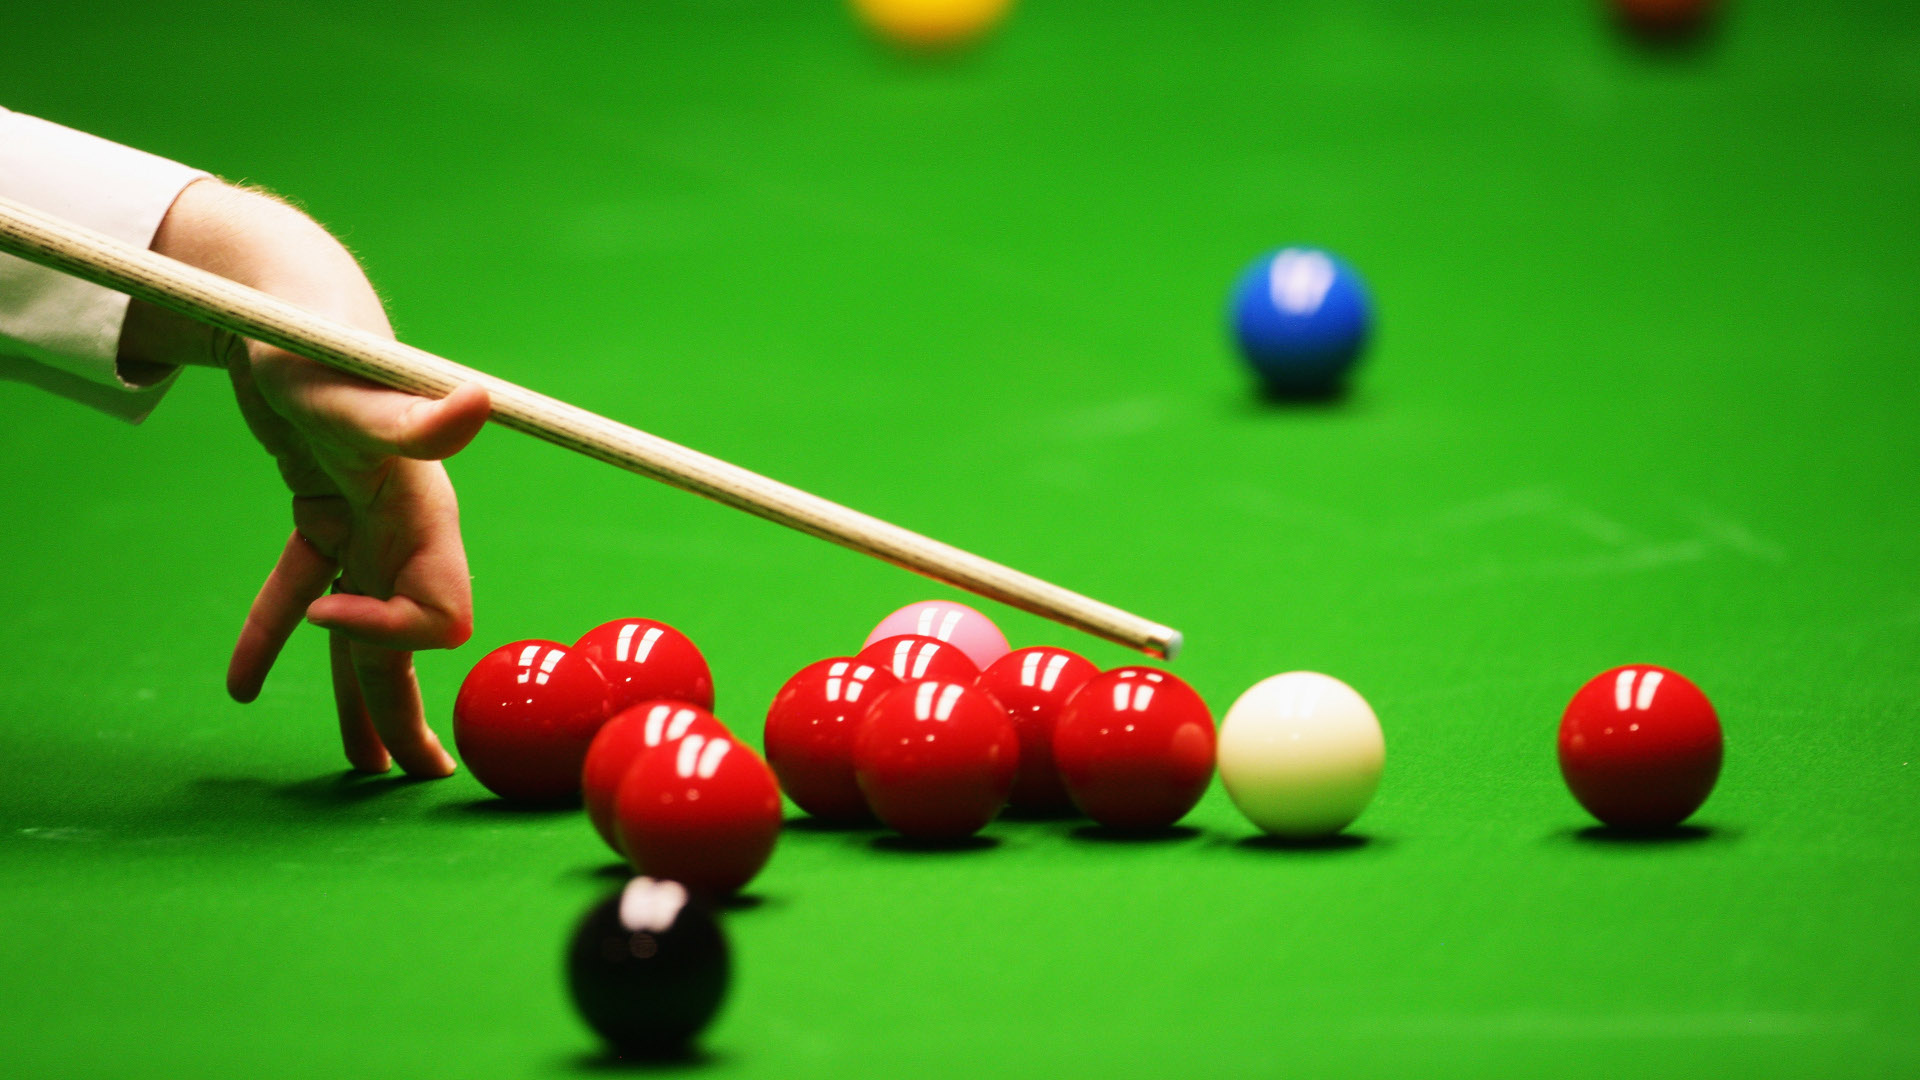 World Seniors Championship, Exciting live stream, Watch online, Captivating snooker action, 1920x1080 Full HD Desktop